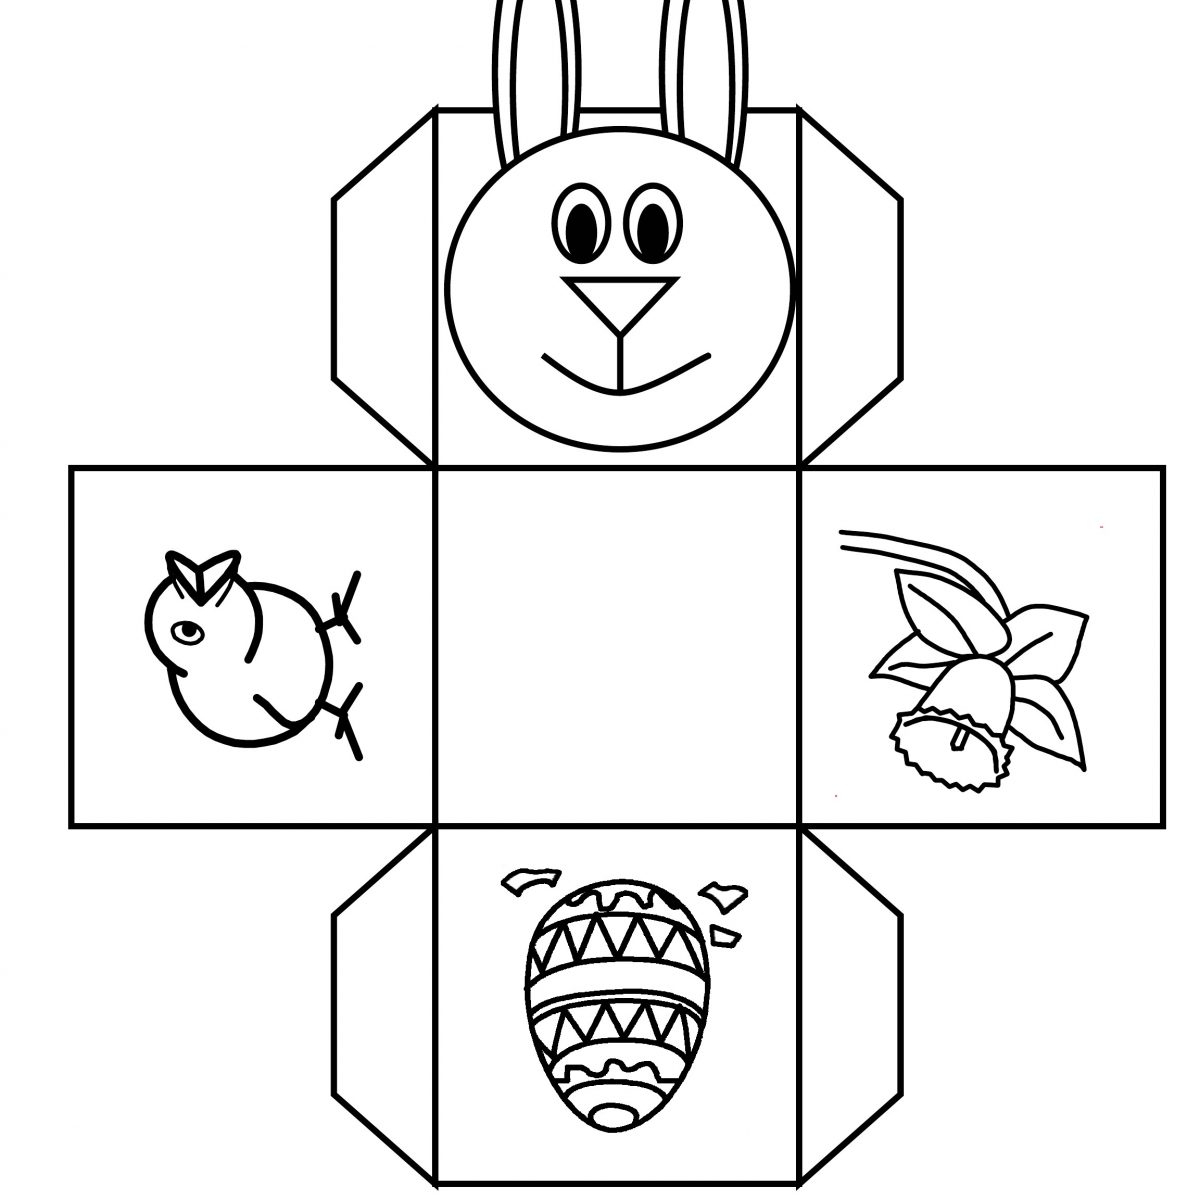 Free Easter Bunny Templates Printables – Hd Easter Images - Free Printable Easter Egg Basket Templates